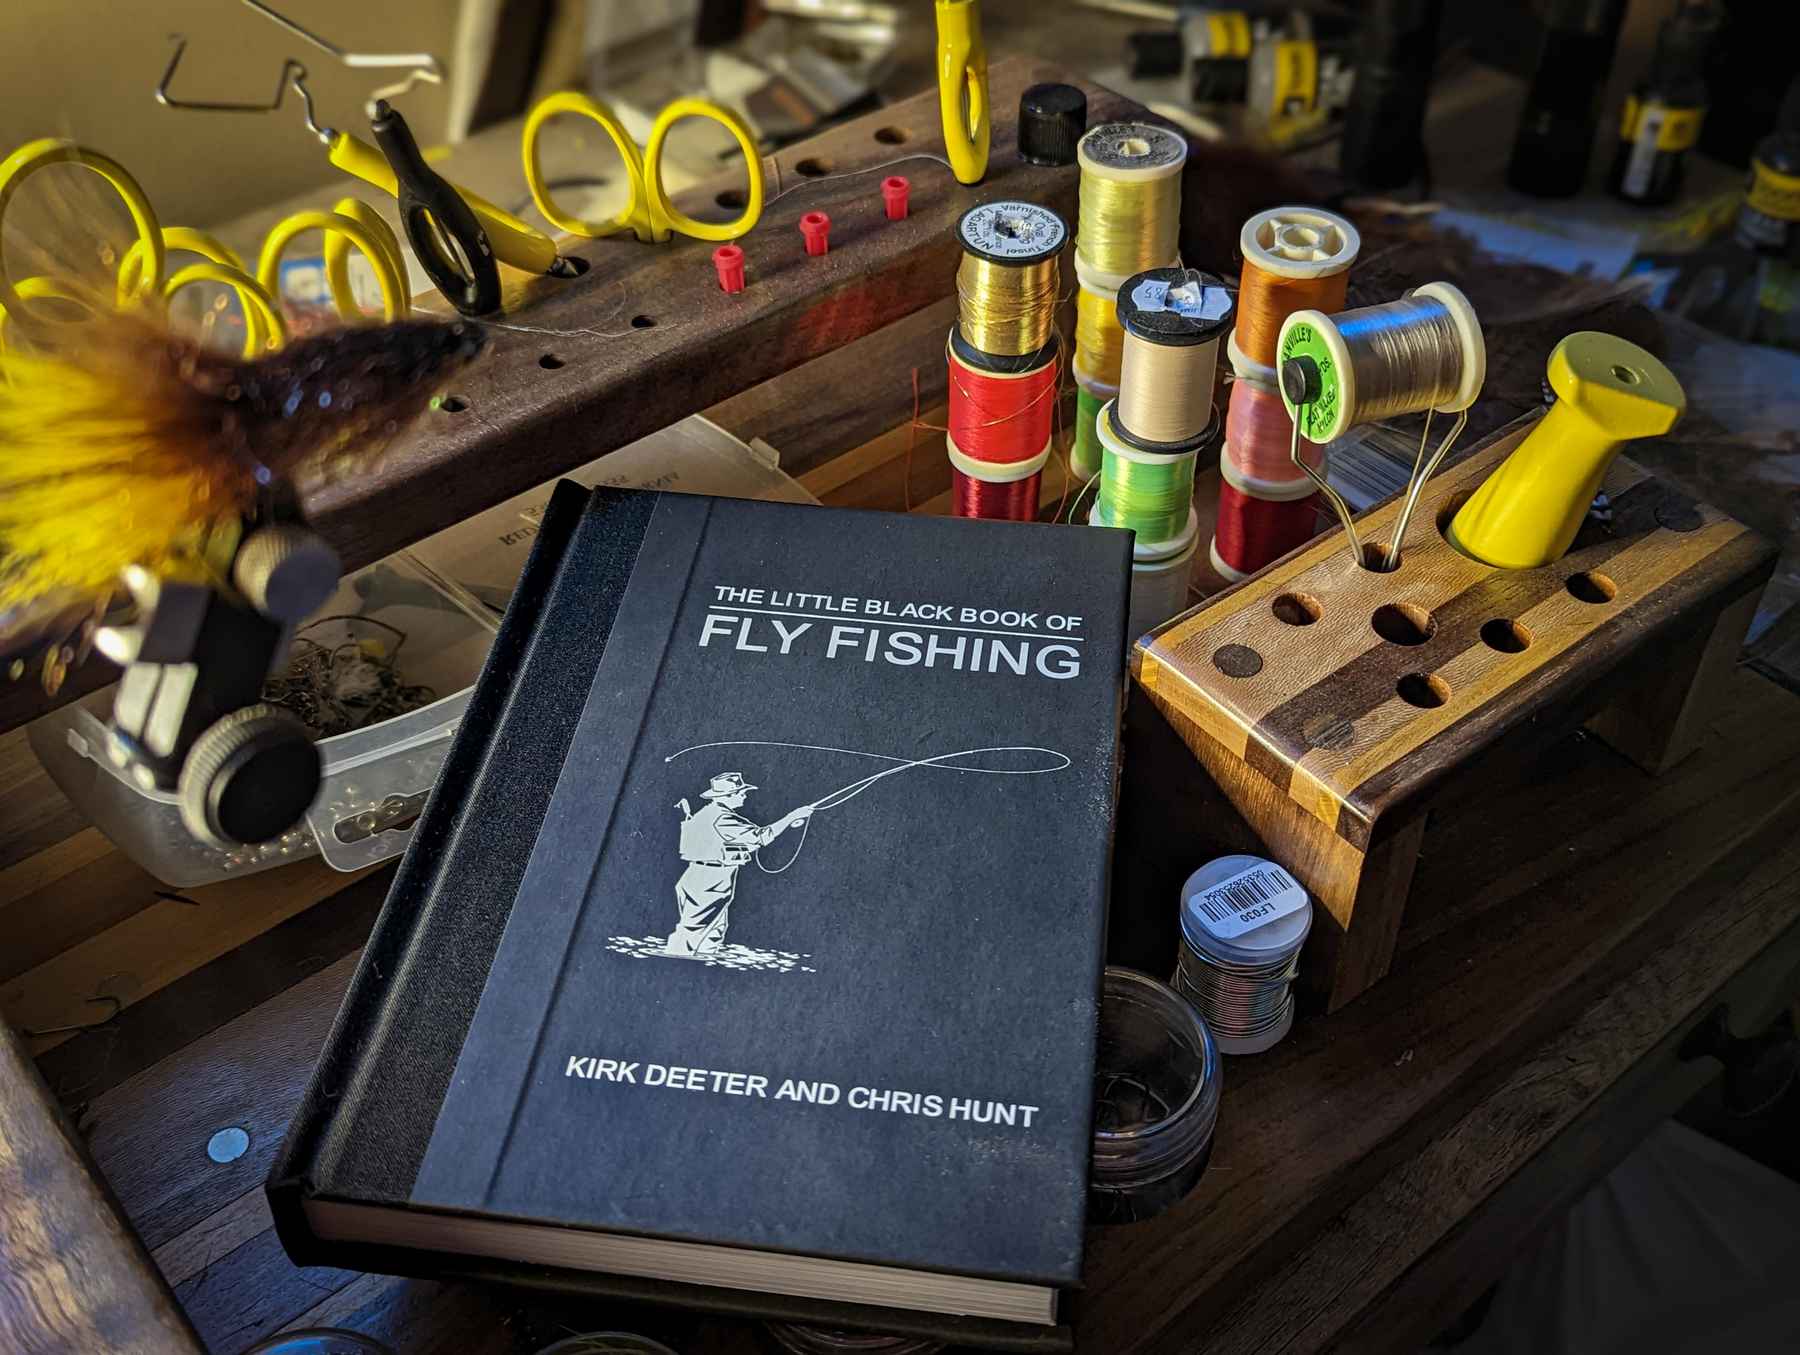 We need to talk about The Little Black Book of Fly Fishing